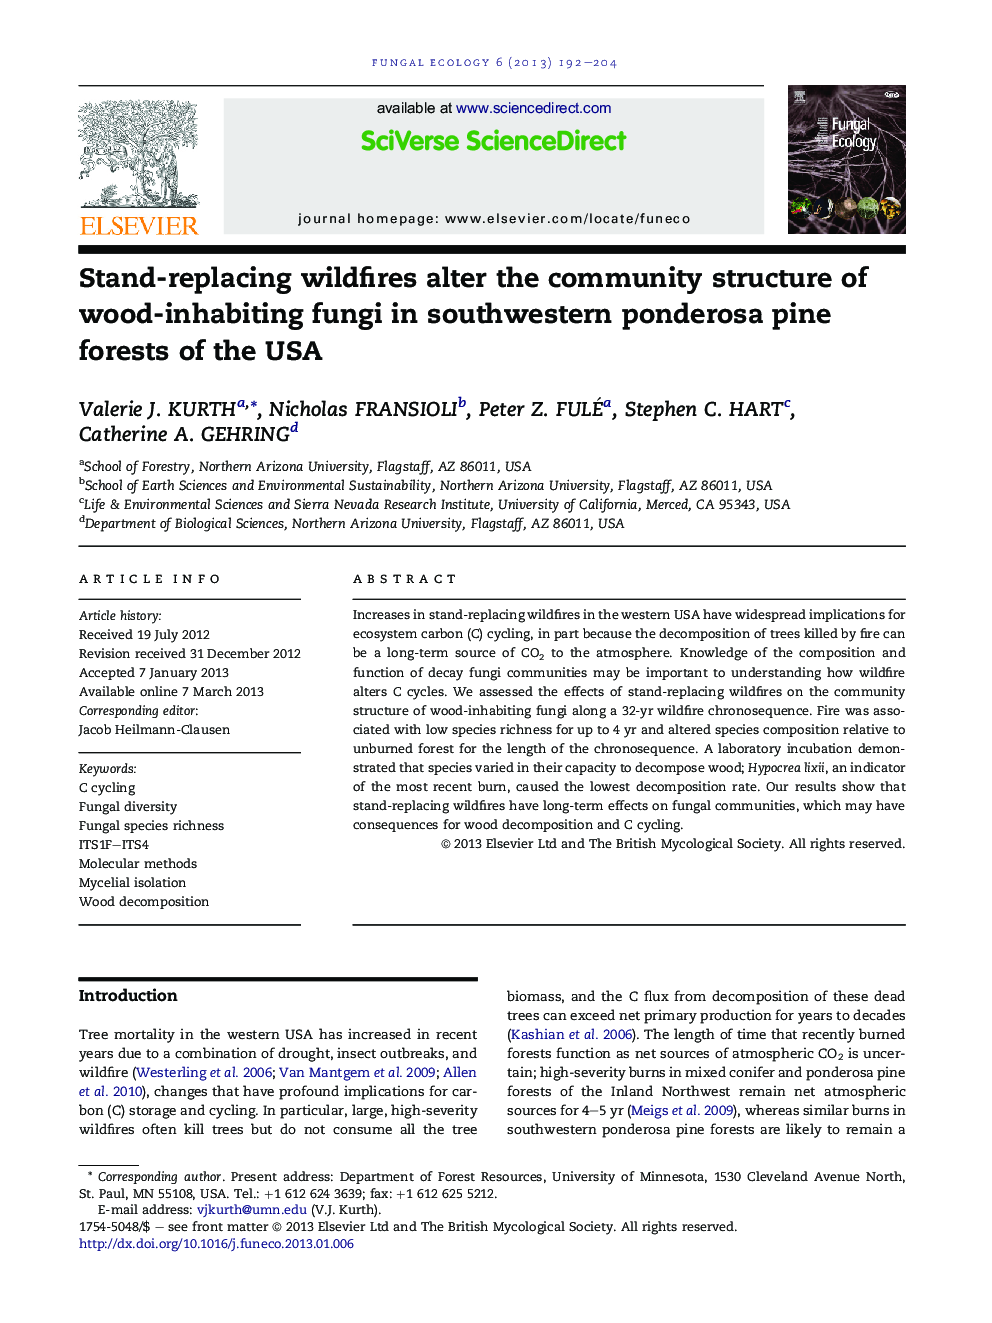 Stand-replacing wildfires alter the community structure of wood-inhabiting fungi in southwestern ponderosa pine forests of the USA